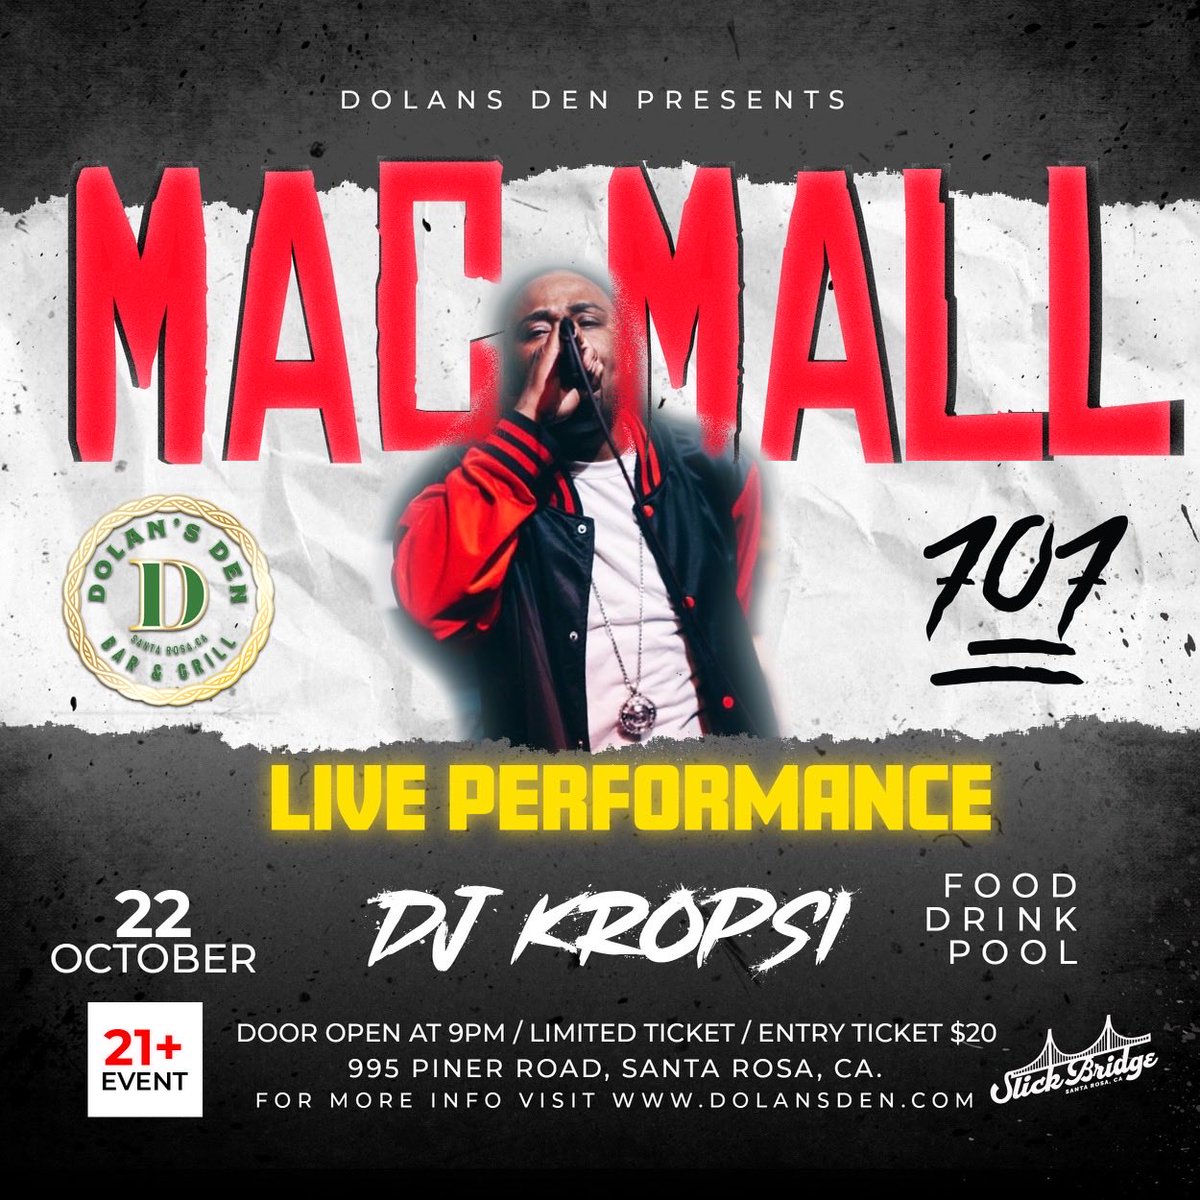 10/22 @therealmacmall performing love live @ @dolansden in #SANTAROSA you know how we do pull up its gone be #MACN